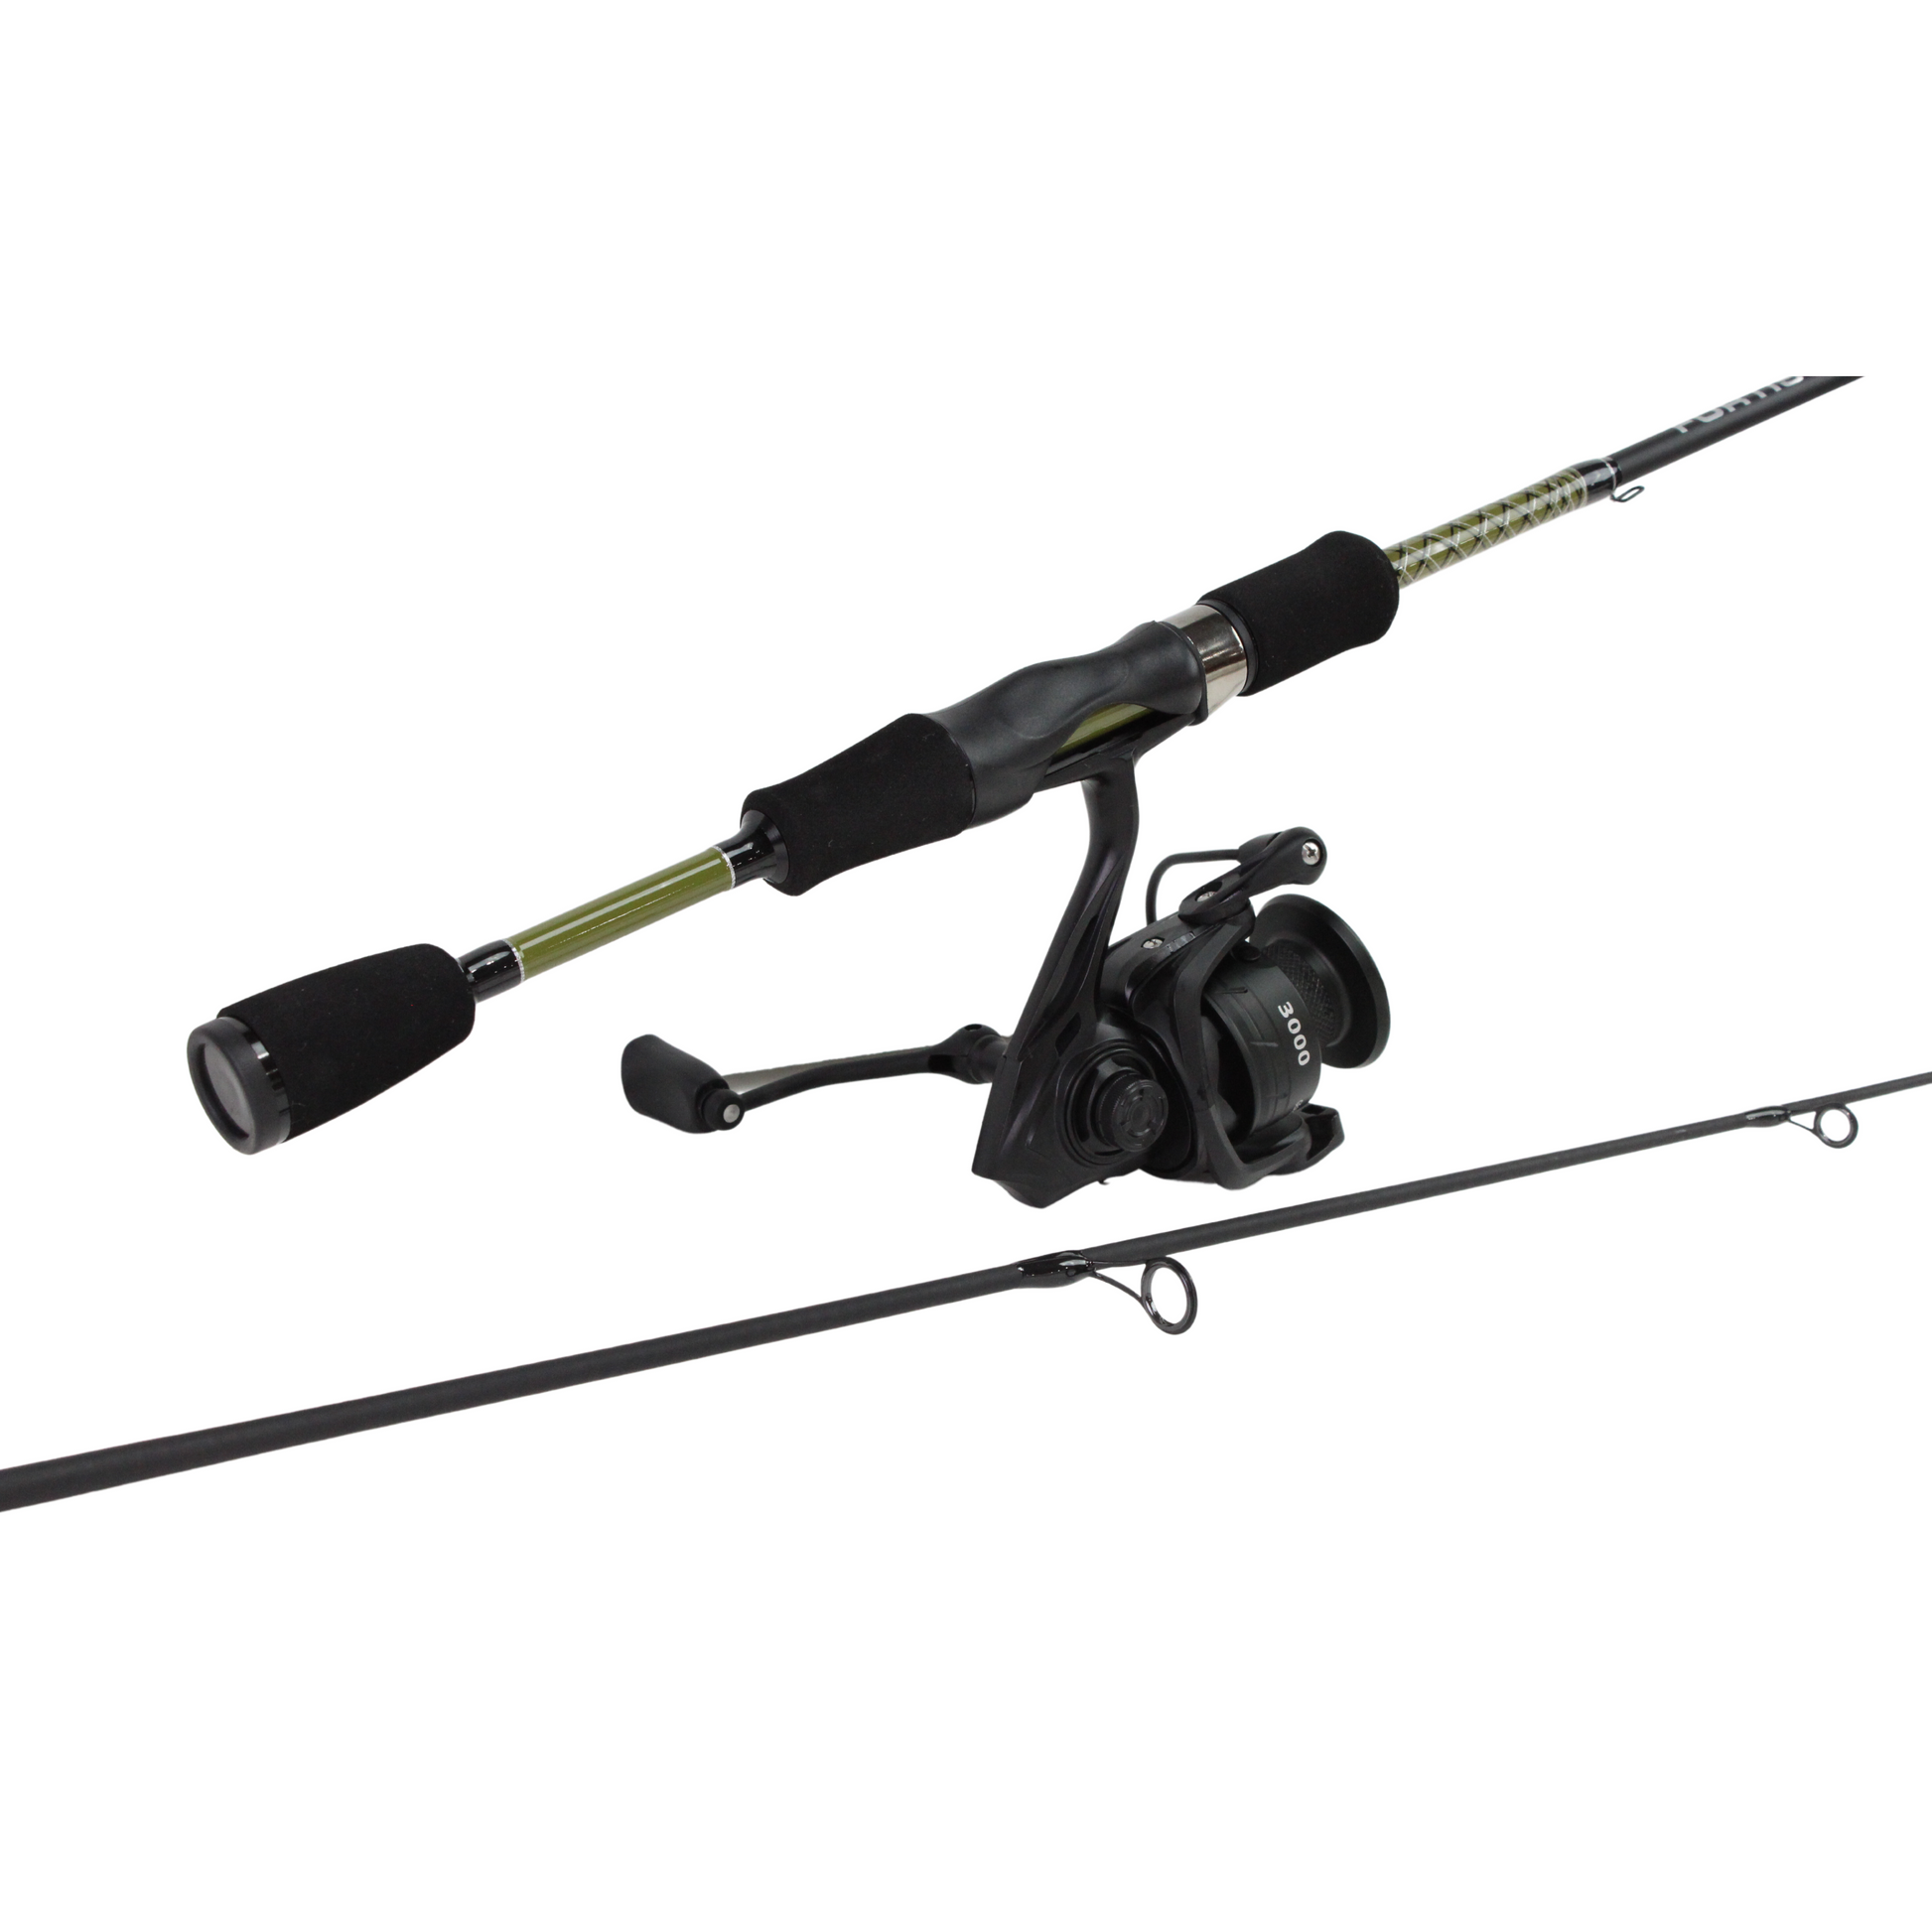 FORTIS 5' 6 Light Action 2 Piece Spinning Rod and 3000 Spinning